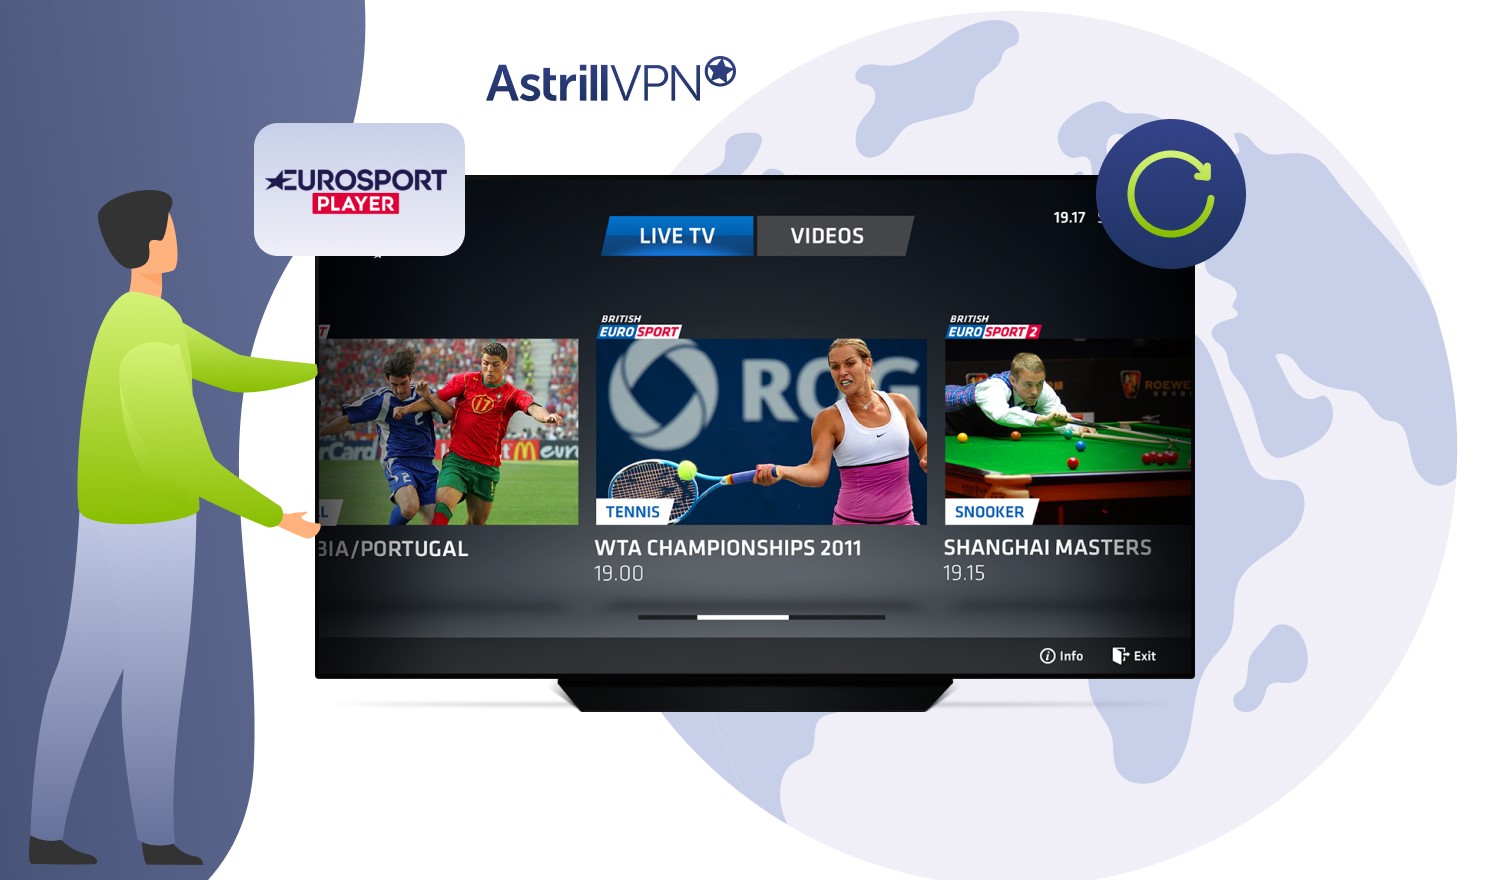 In which countries is Eurosport Player available?